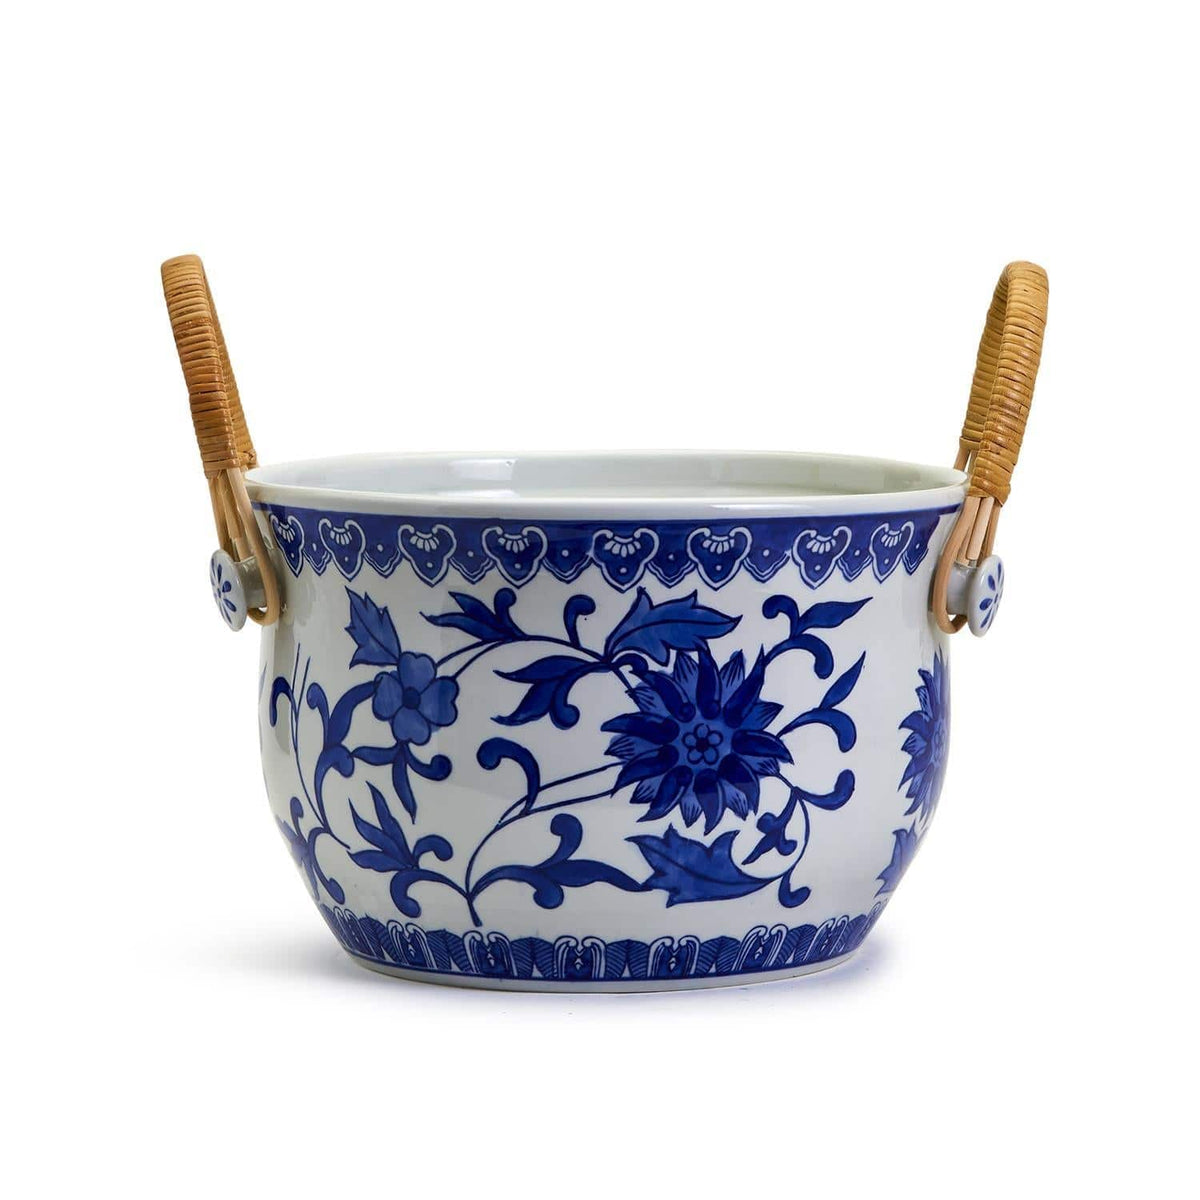 Chinoiserie Blue and White Party Bucket with Bamboo Handles - The Preppy Bunny